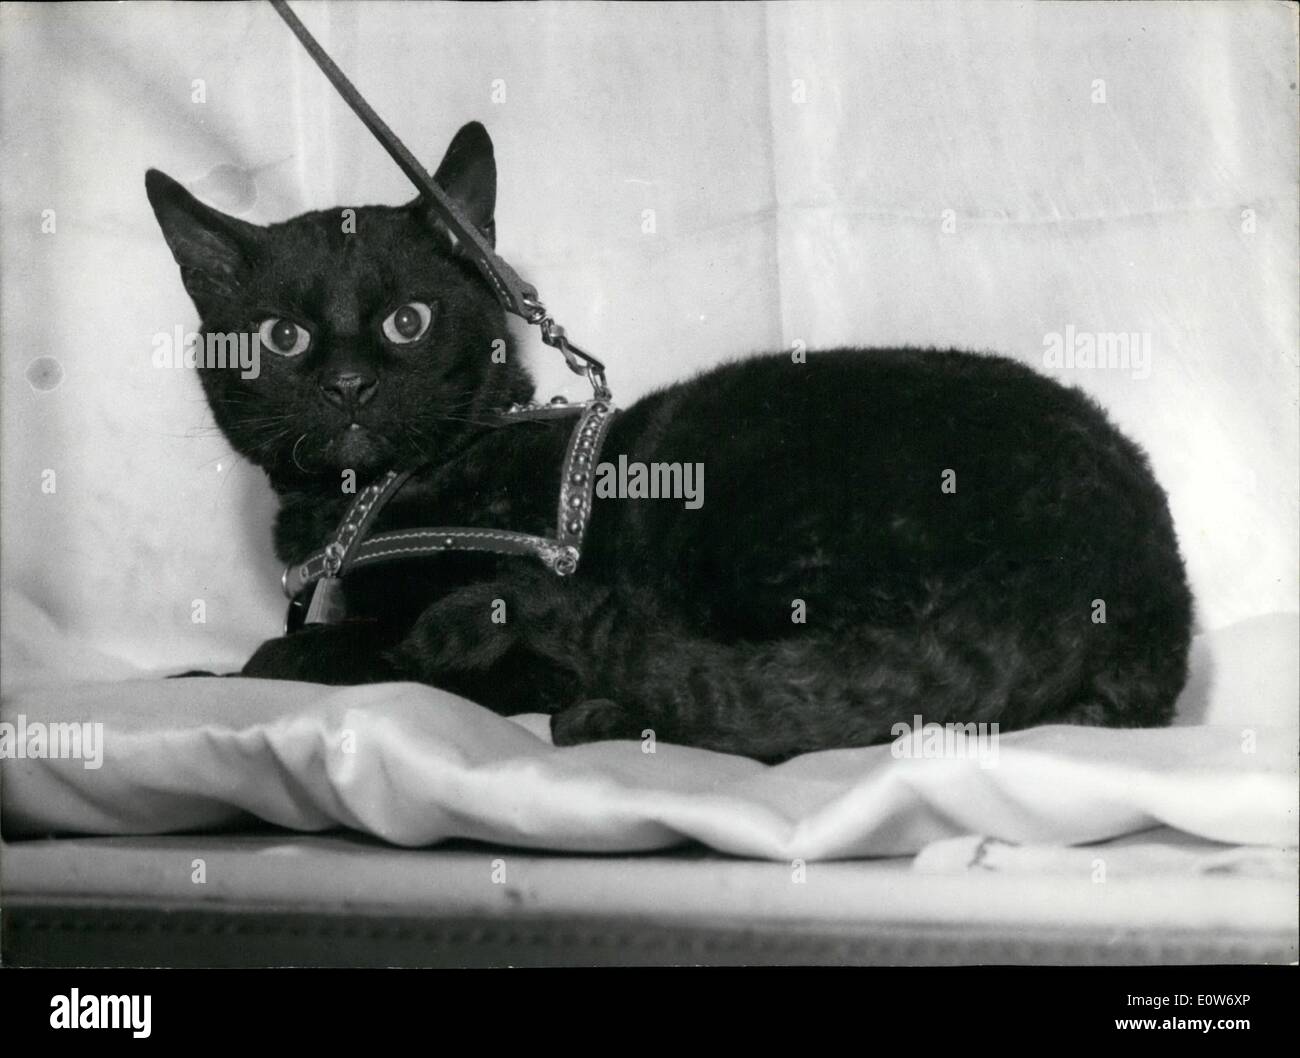 Oct. 10, 1961 - ''Marco'' the Black Cat Chose Freedom: ''Marco'', the black fleeced cat of the ''Rex'' Race, is the No.1 attraction of the Cat Show just opened at the Hotel continental, Paris. Marco's fame is not only Due to his Race. His story is quite unusual. Marco belongs to a German Professor living in East Germany. His proprietor decided to show Marco at the Paris Cat Show Stock Photo